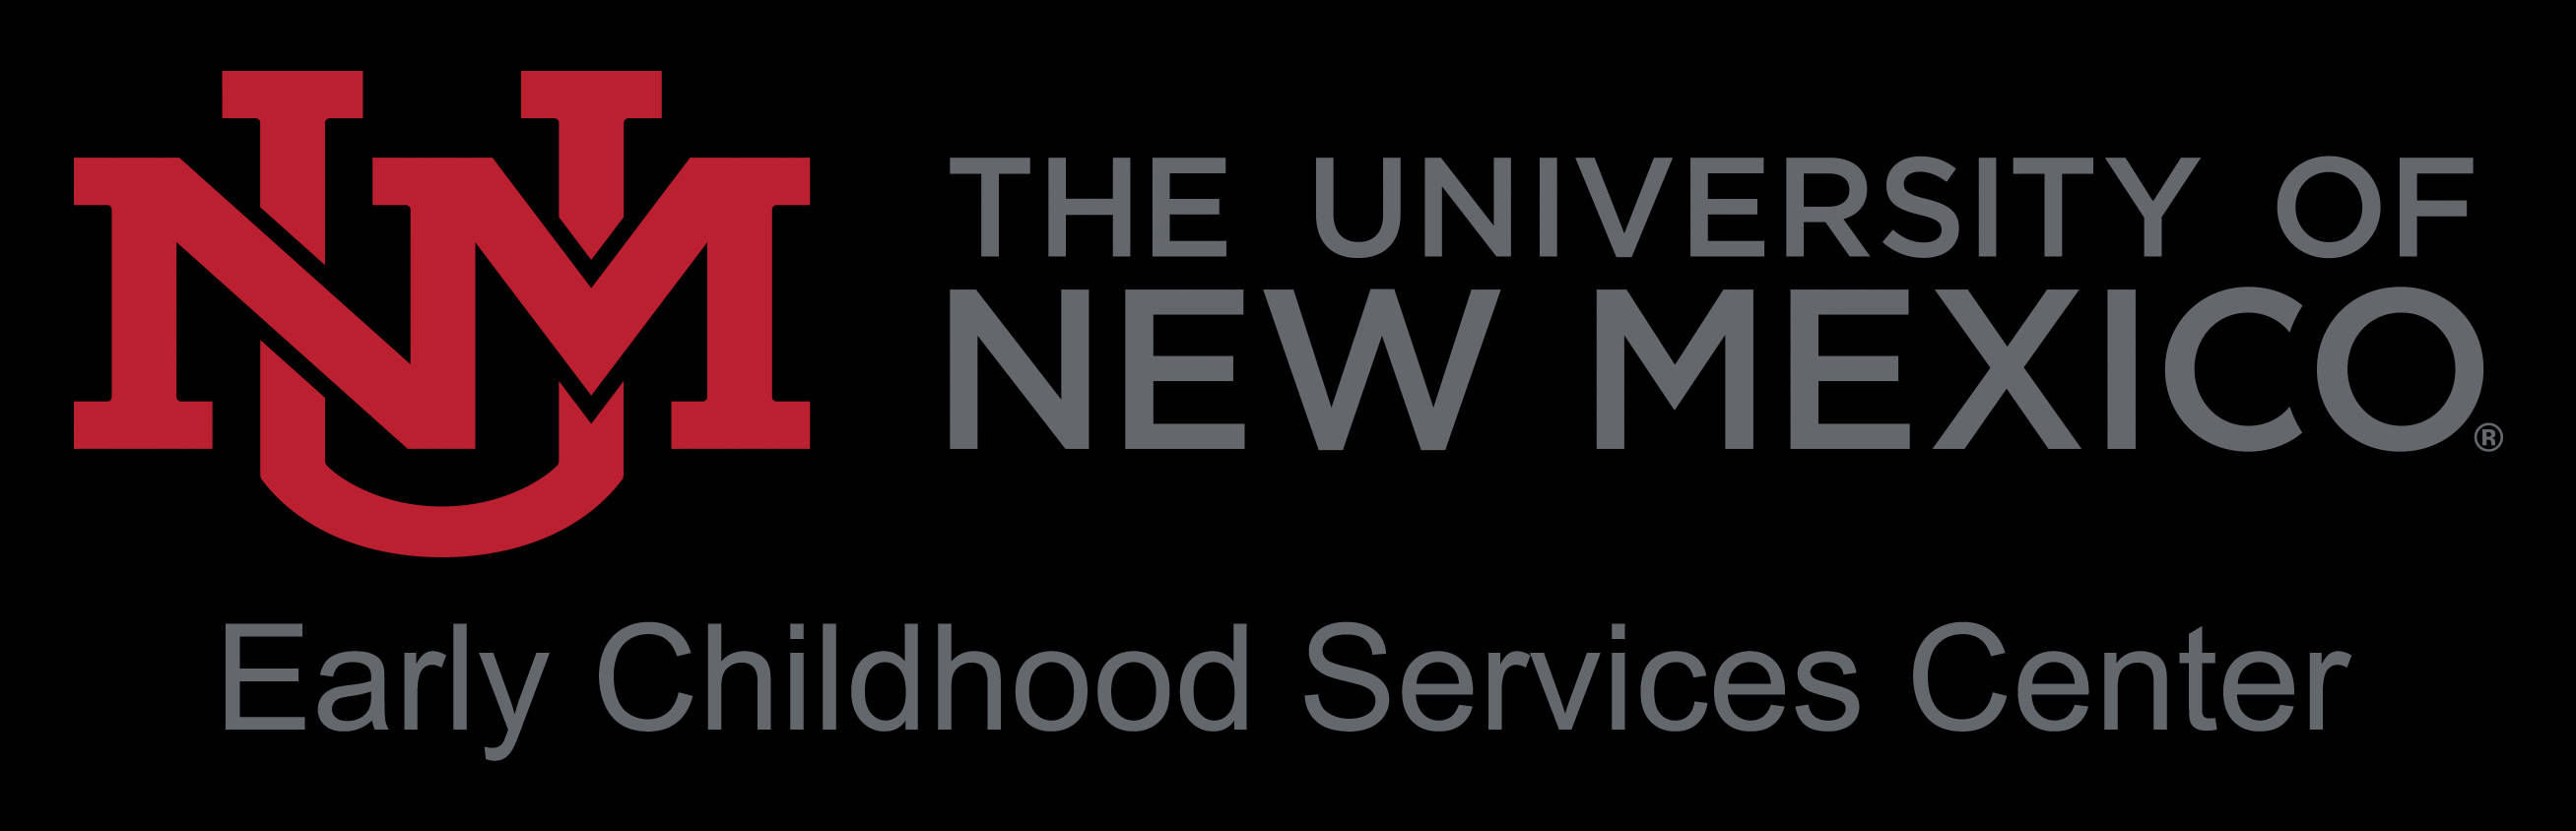 University Of New Mexico Early Childhood Services Center Wallpaper